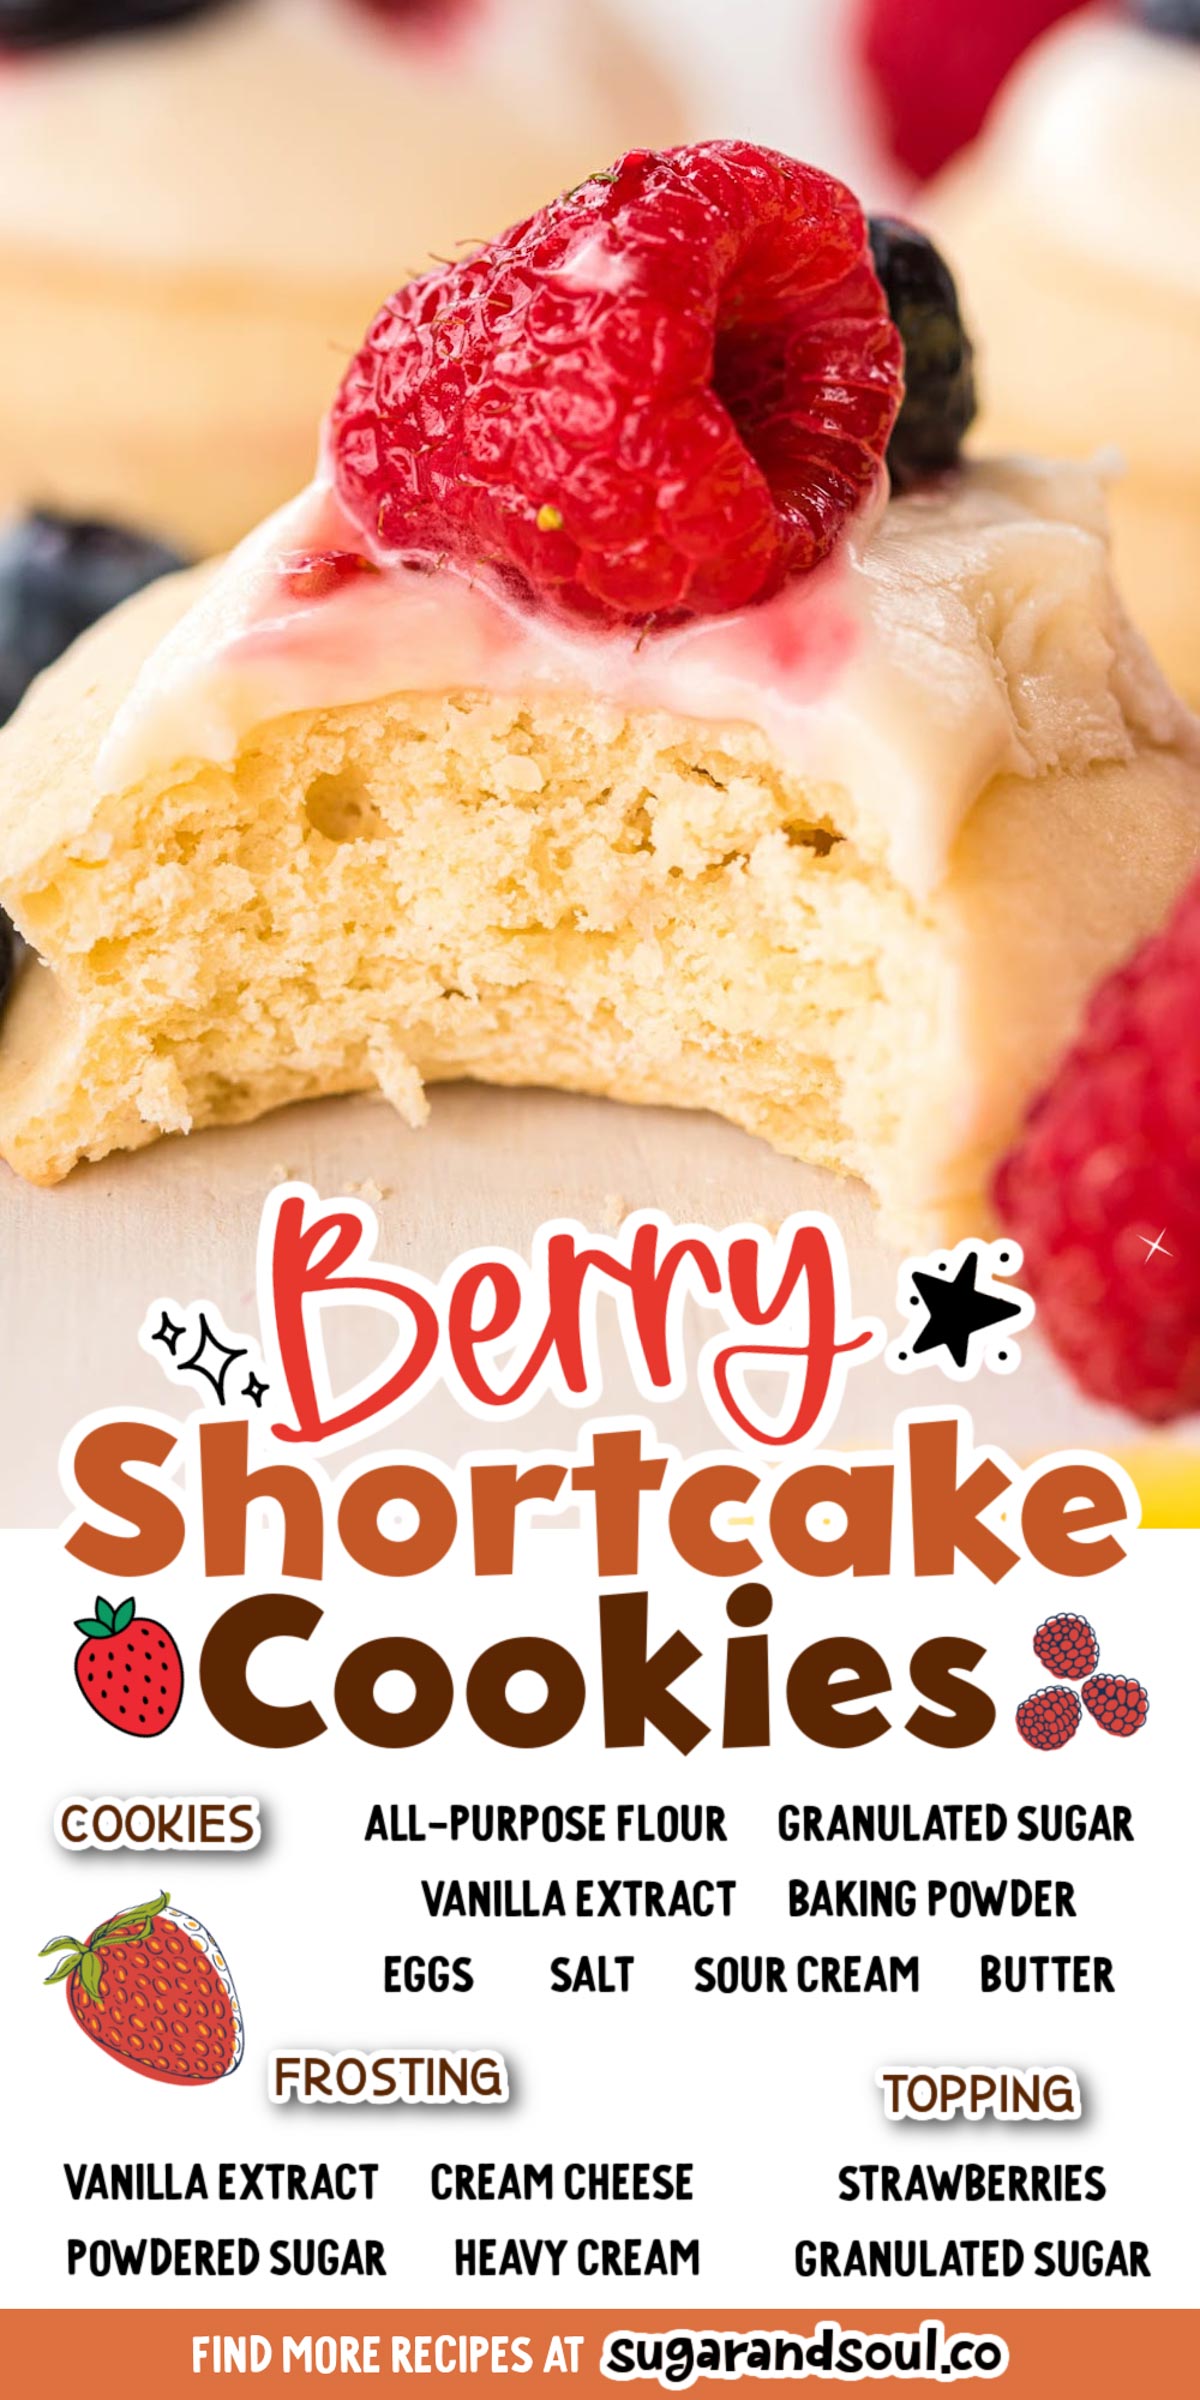 Berry Shortcake Cookies have a soft, tender cookie that's topped with silky cream cheese frosting and macerated berries! Prep two dozen cookies in just 30 minutes! via @sugarandsoulco